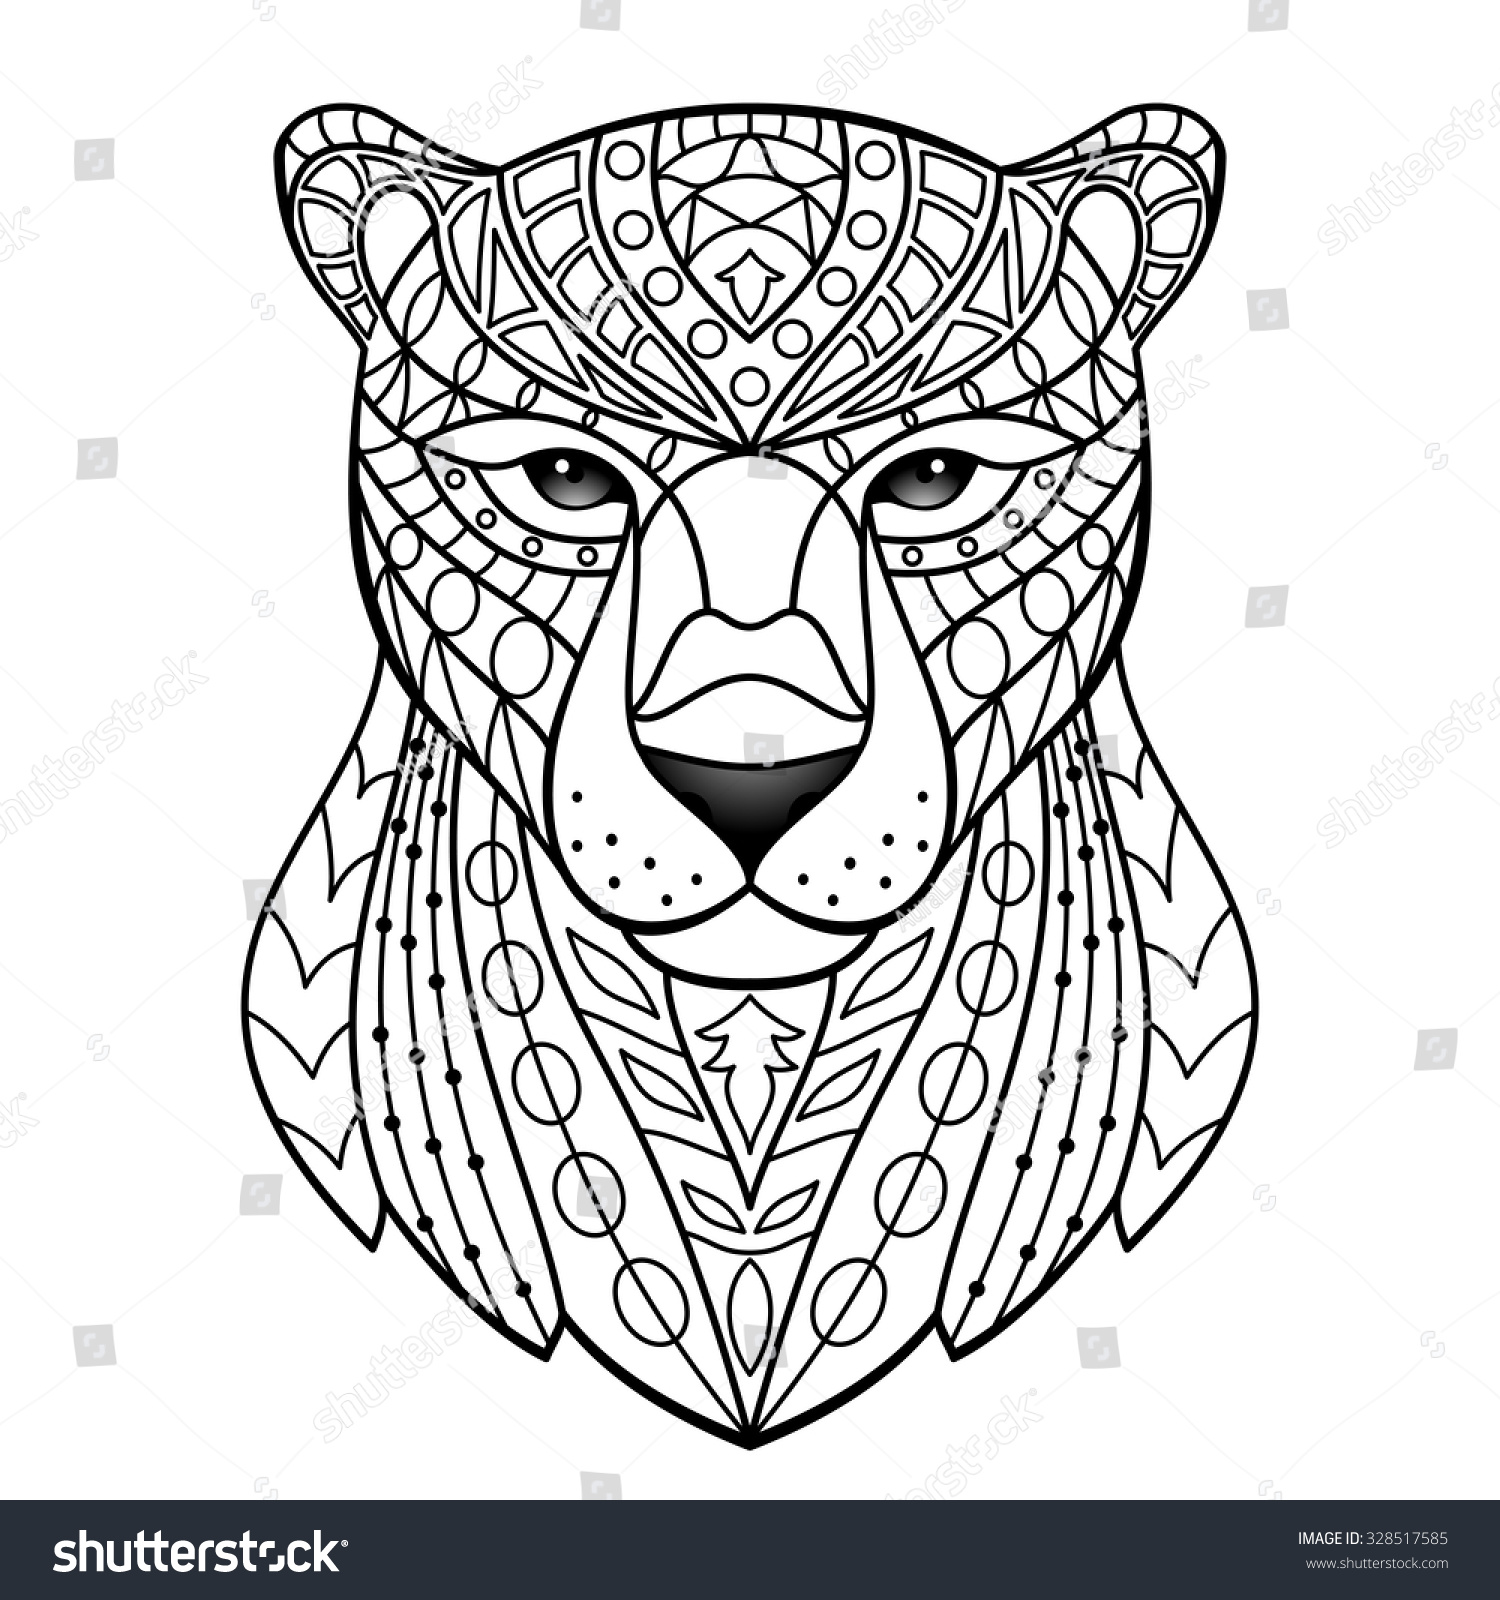 panther clipart free vector - photo #31